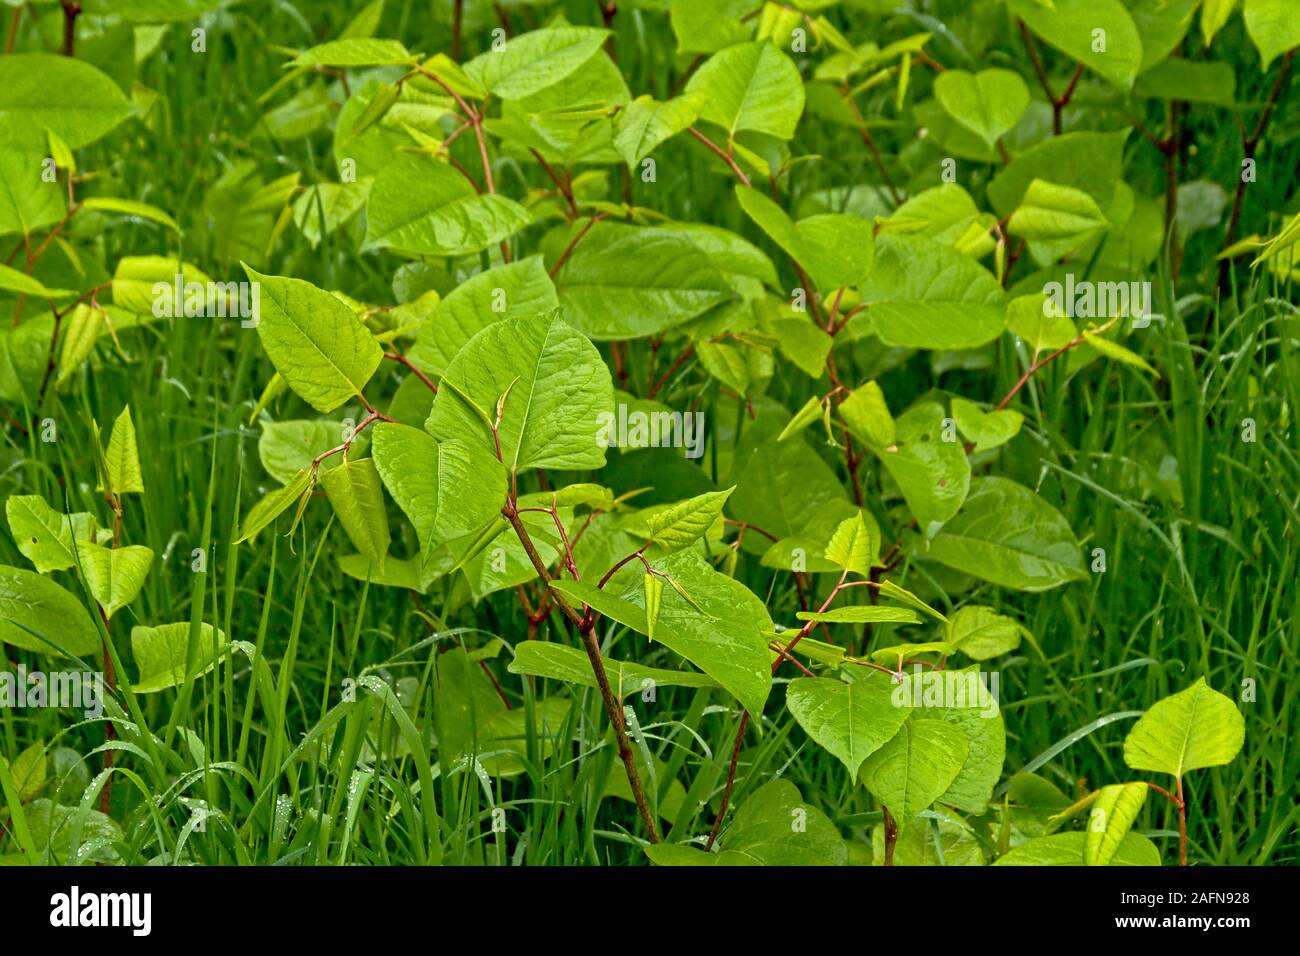 young Japanese knotweed plants, a badly invasive species taking over the garden. selective focus Stock Photo